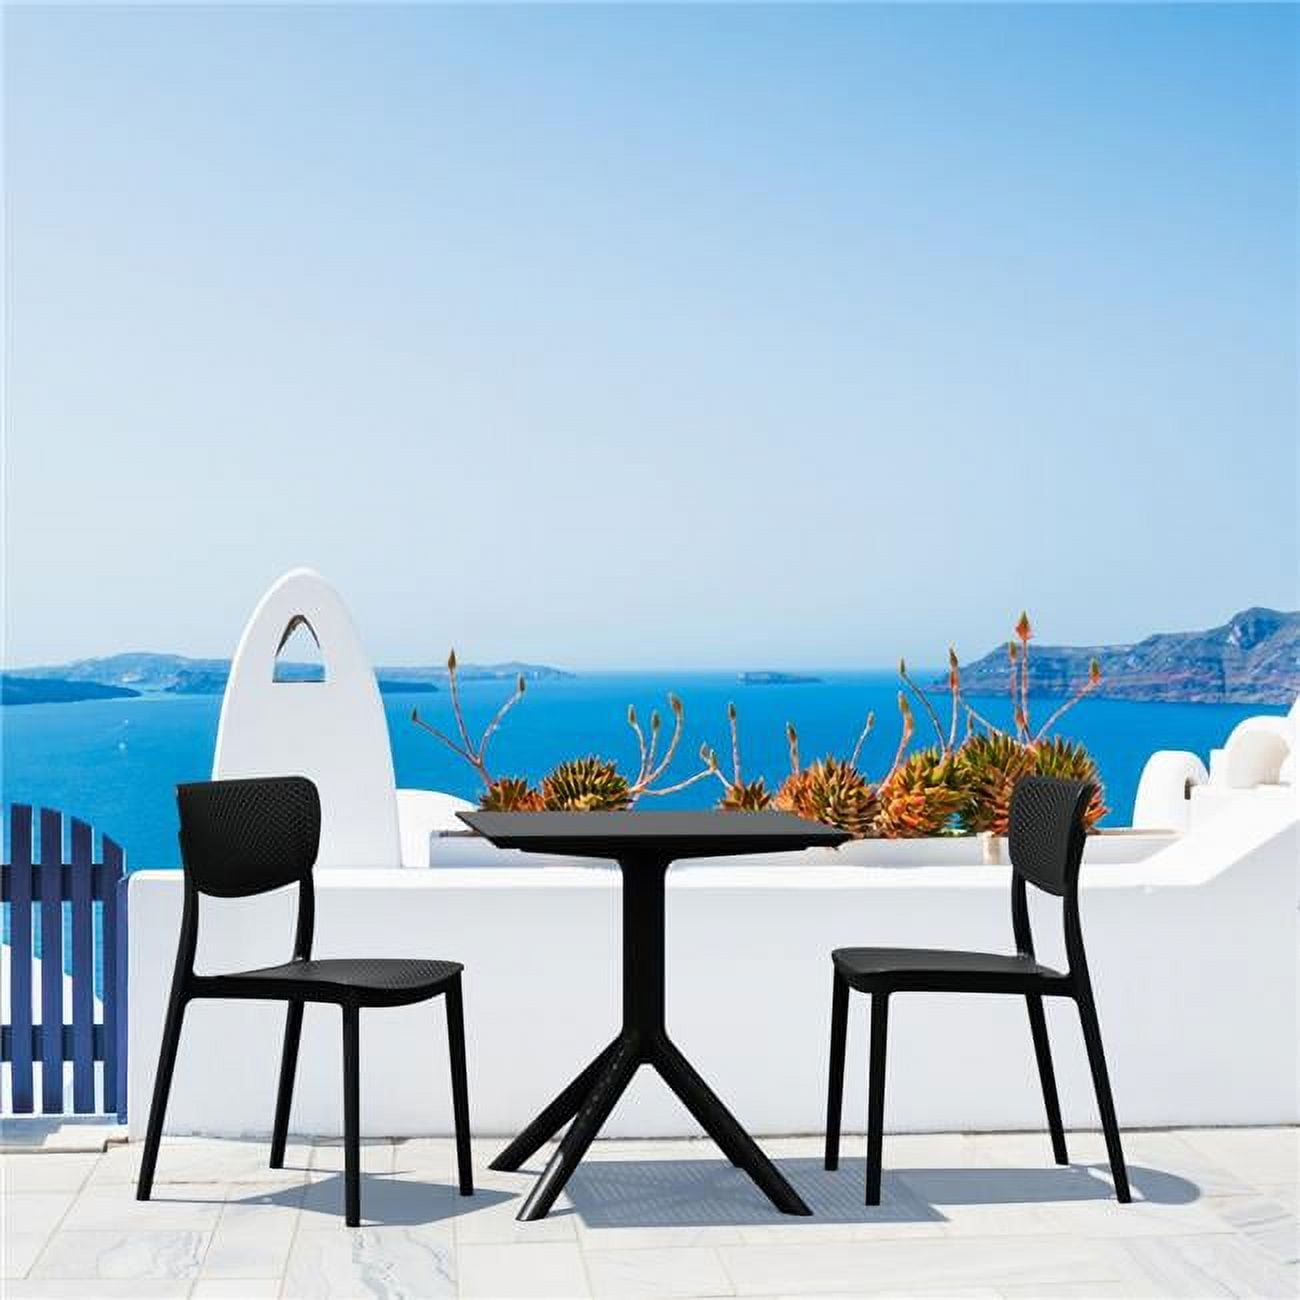 Isp1293s-bla Lucy Outdoor Bistro Set With 31 In. Table Top, Black - 3 Piece